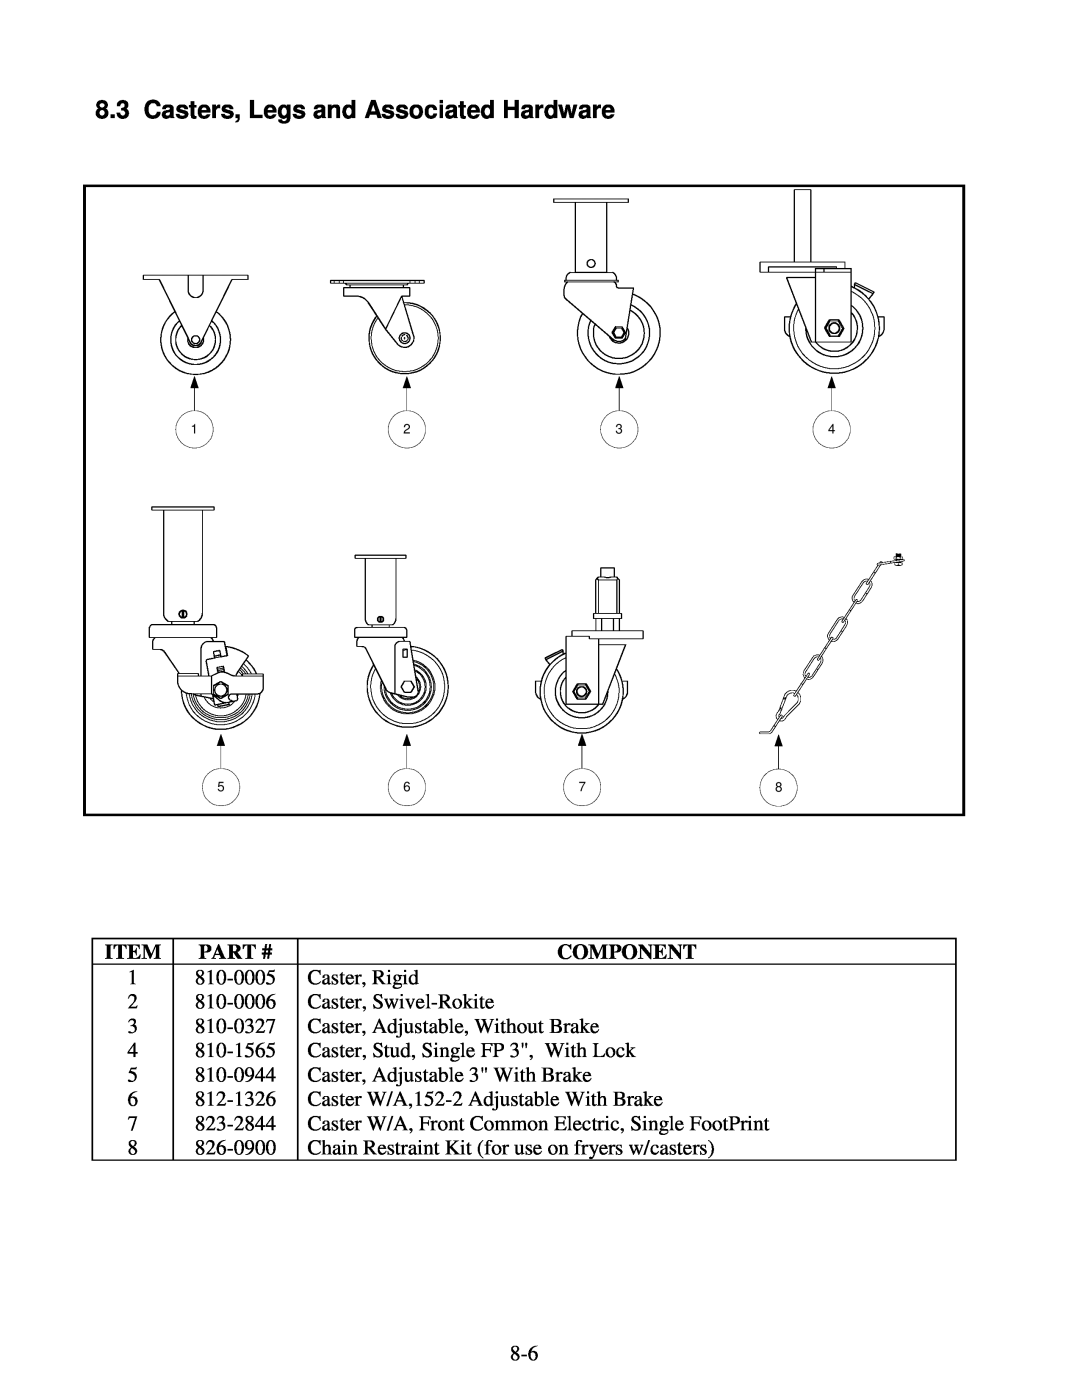 Frymaster H14 Series service manual Casters, Legs and Associated Hardware, Part #, Component 